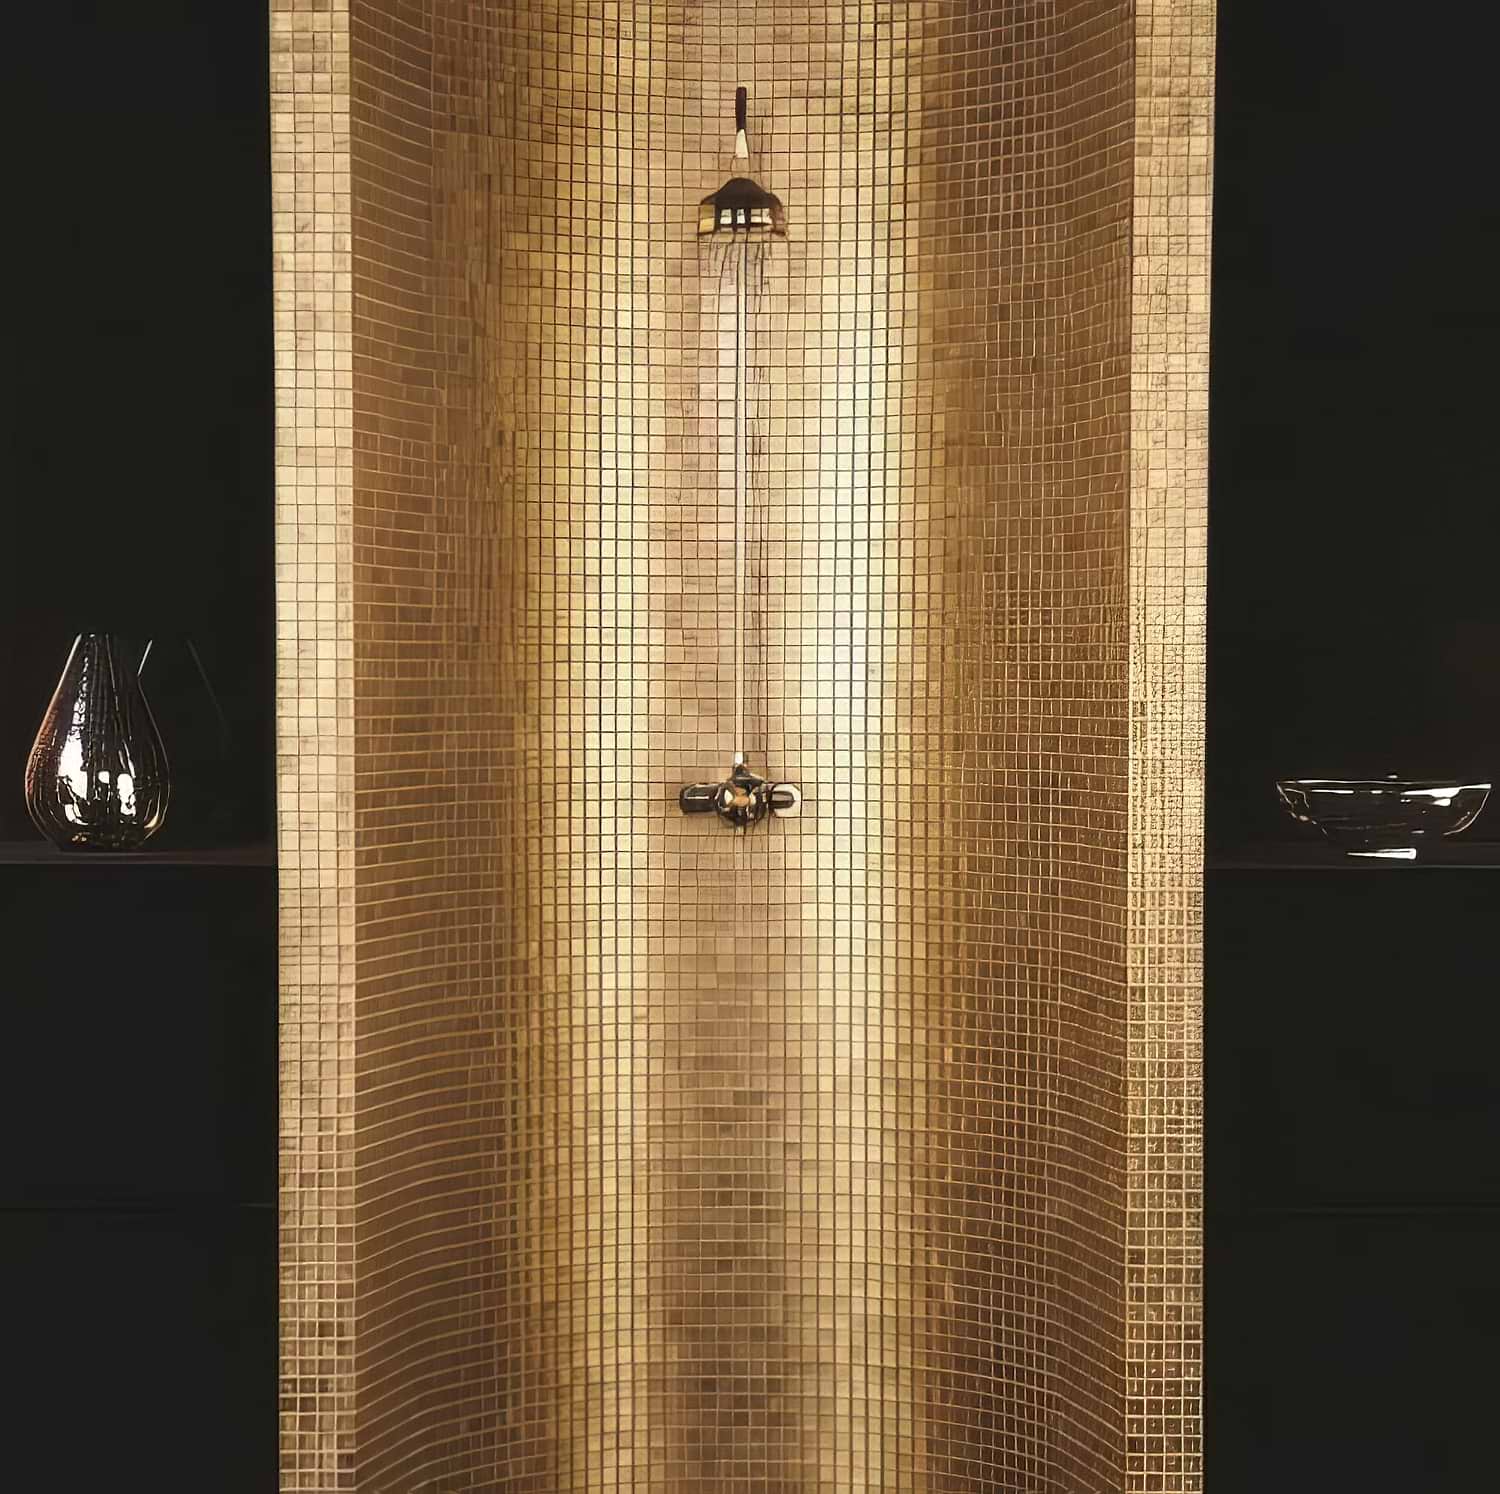 If you're looking for interior inspiration, pick Original Style Bullion Gold Rush Glass Mosaics stocked by Hyperion Tiles